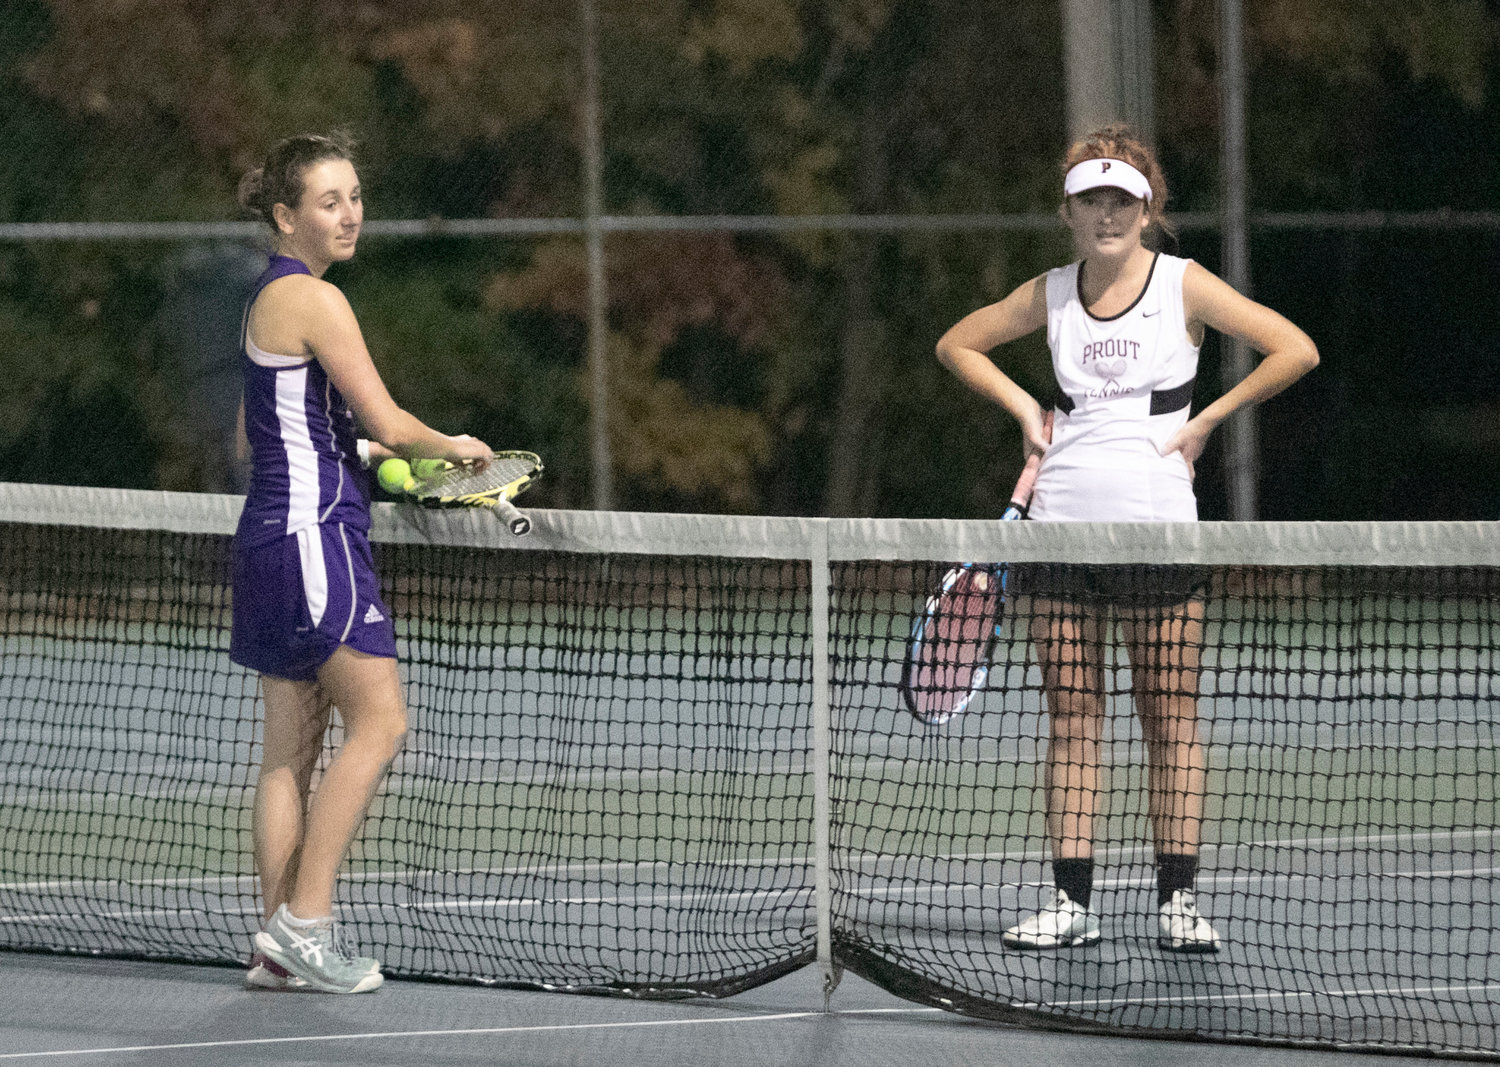 Huskies third singles player sophomore Cate Merriam plays in a tie breaker for the match against Prout's Breck O’Connor.